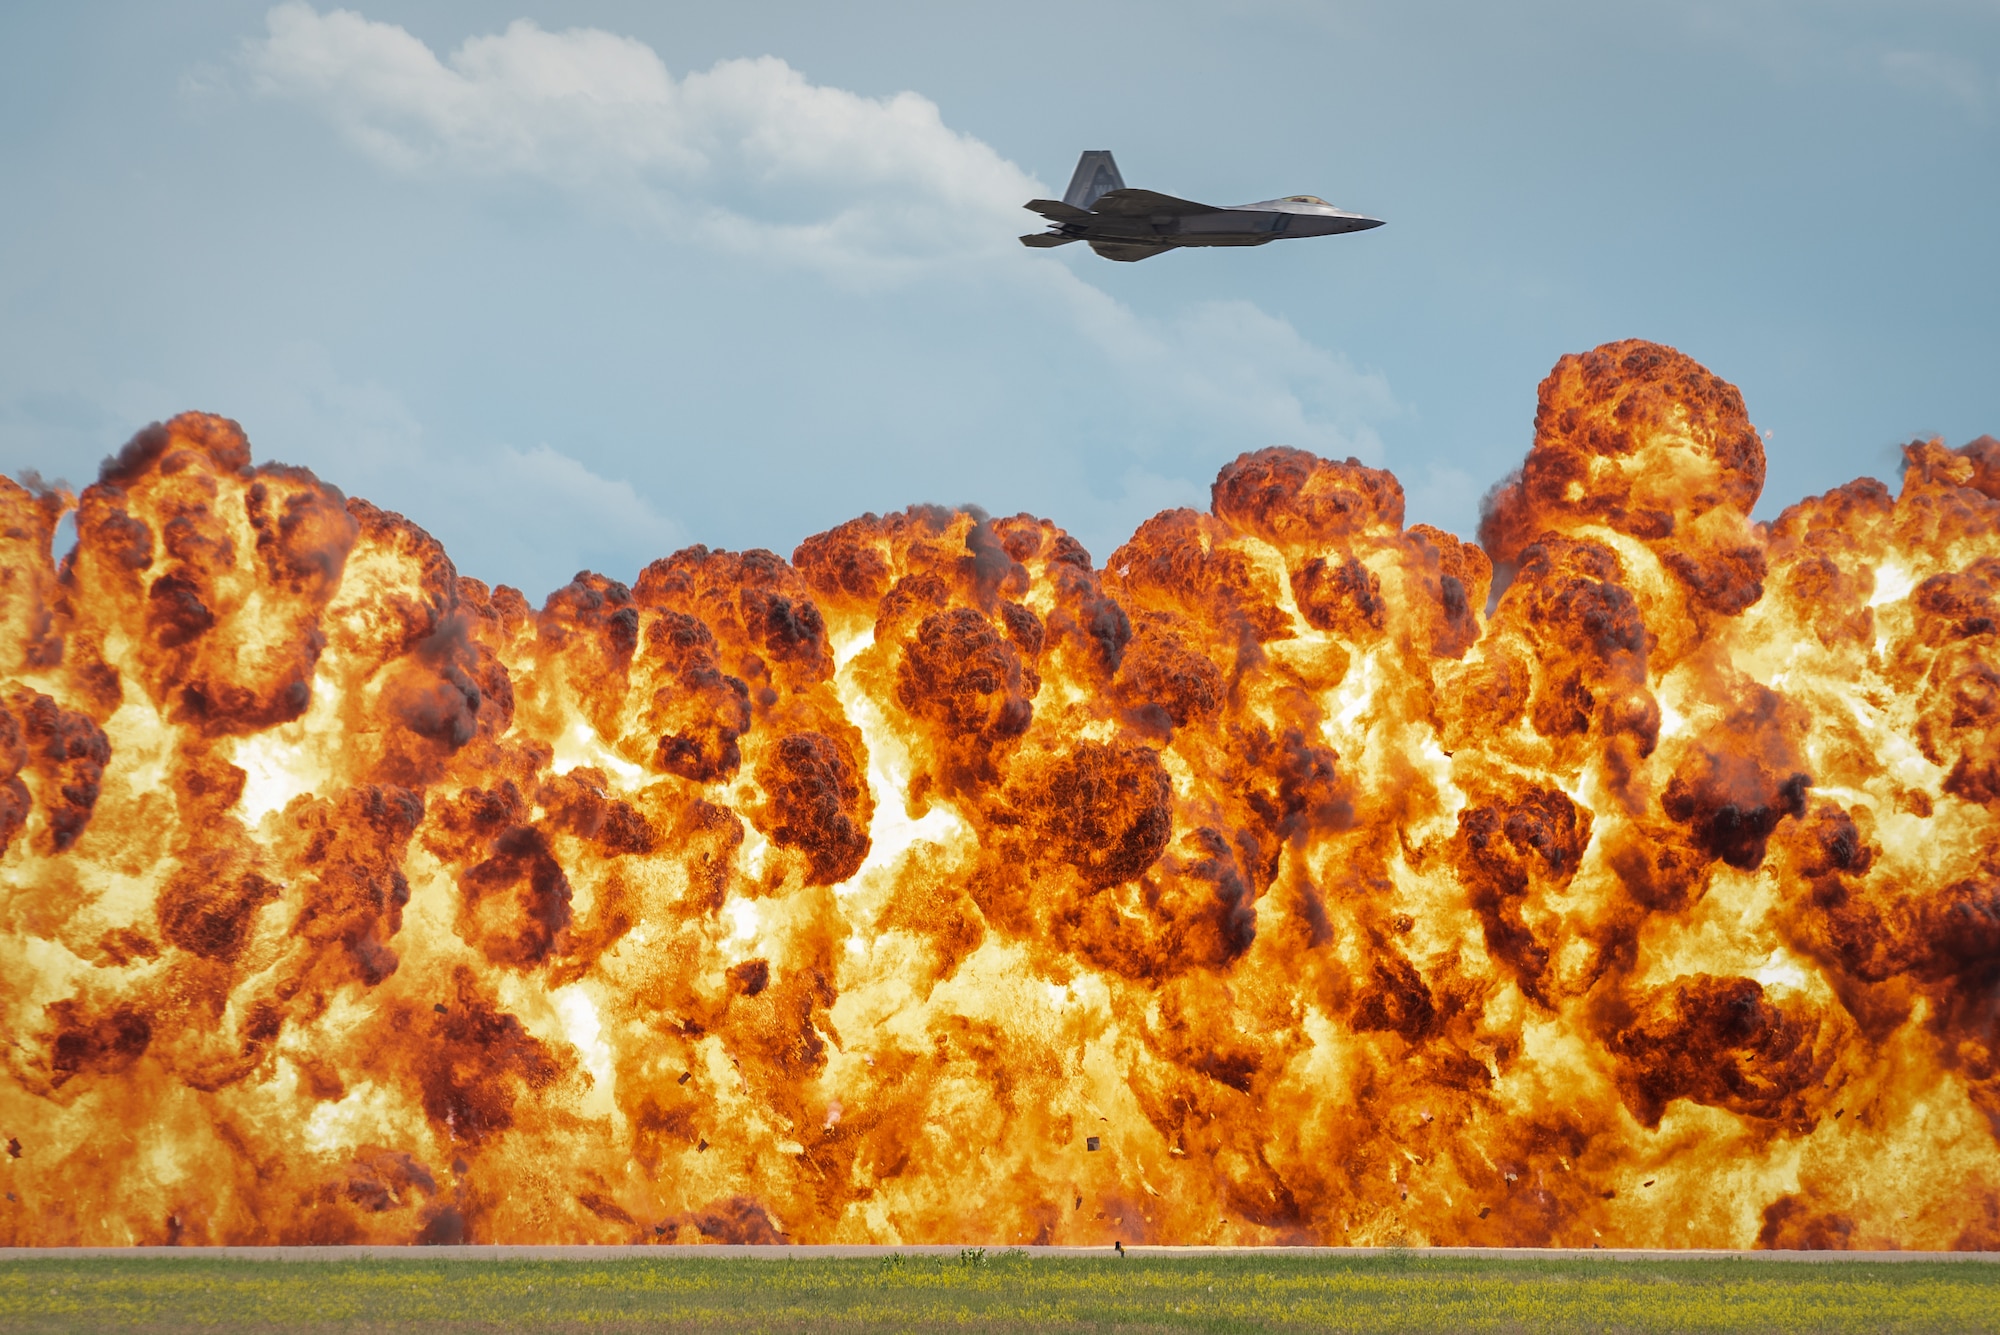 1,000-foot wall of fire explodes below the F-22 Raptor